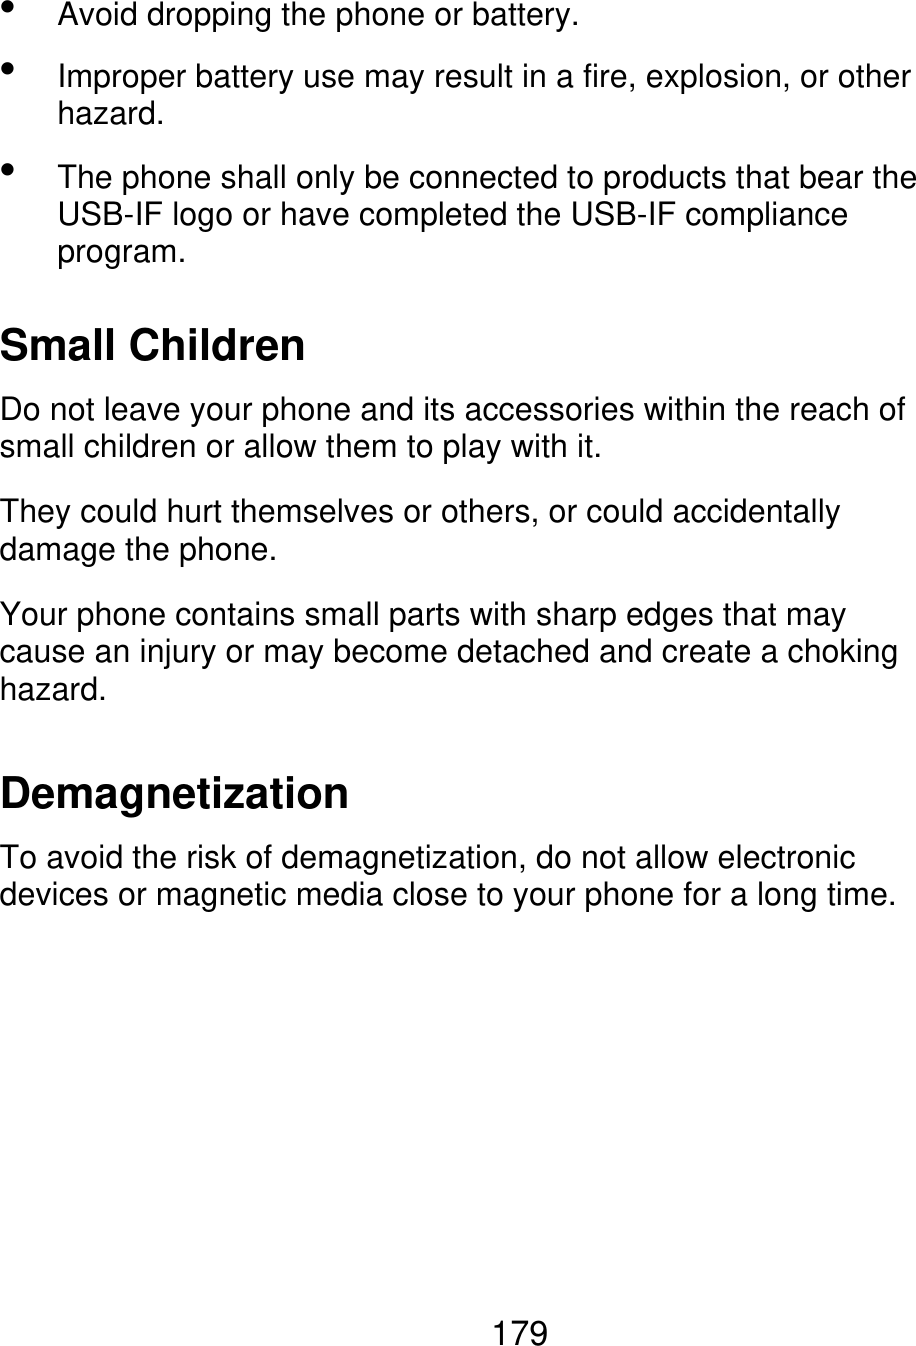    Avoid dropping the phone or battery. Improper battery use may result in a fire, explosion, or other hazard. The phone shall only be connected to products that bear the USB-IF logo or have completed the USB-IF compliance program. Small Children Do not leave your phone and its accessories within the reach of small children or allow them to play with it. They could hurt themselves or others, or could accidentally damage the phone. Your phone contains small parts with sharp edges that may cause an injury or may become detached and create a choking hazard. Demagnetization To avoid the risk of demagnetization, do not allow electronic devices or magnetic media close to your phone for a long time. 179 